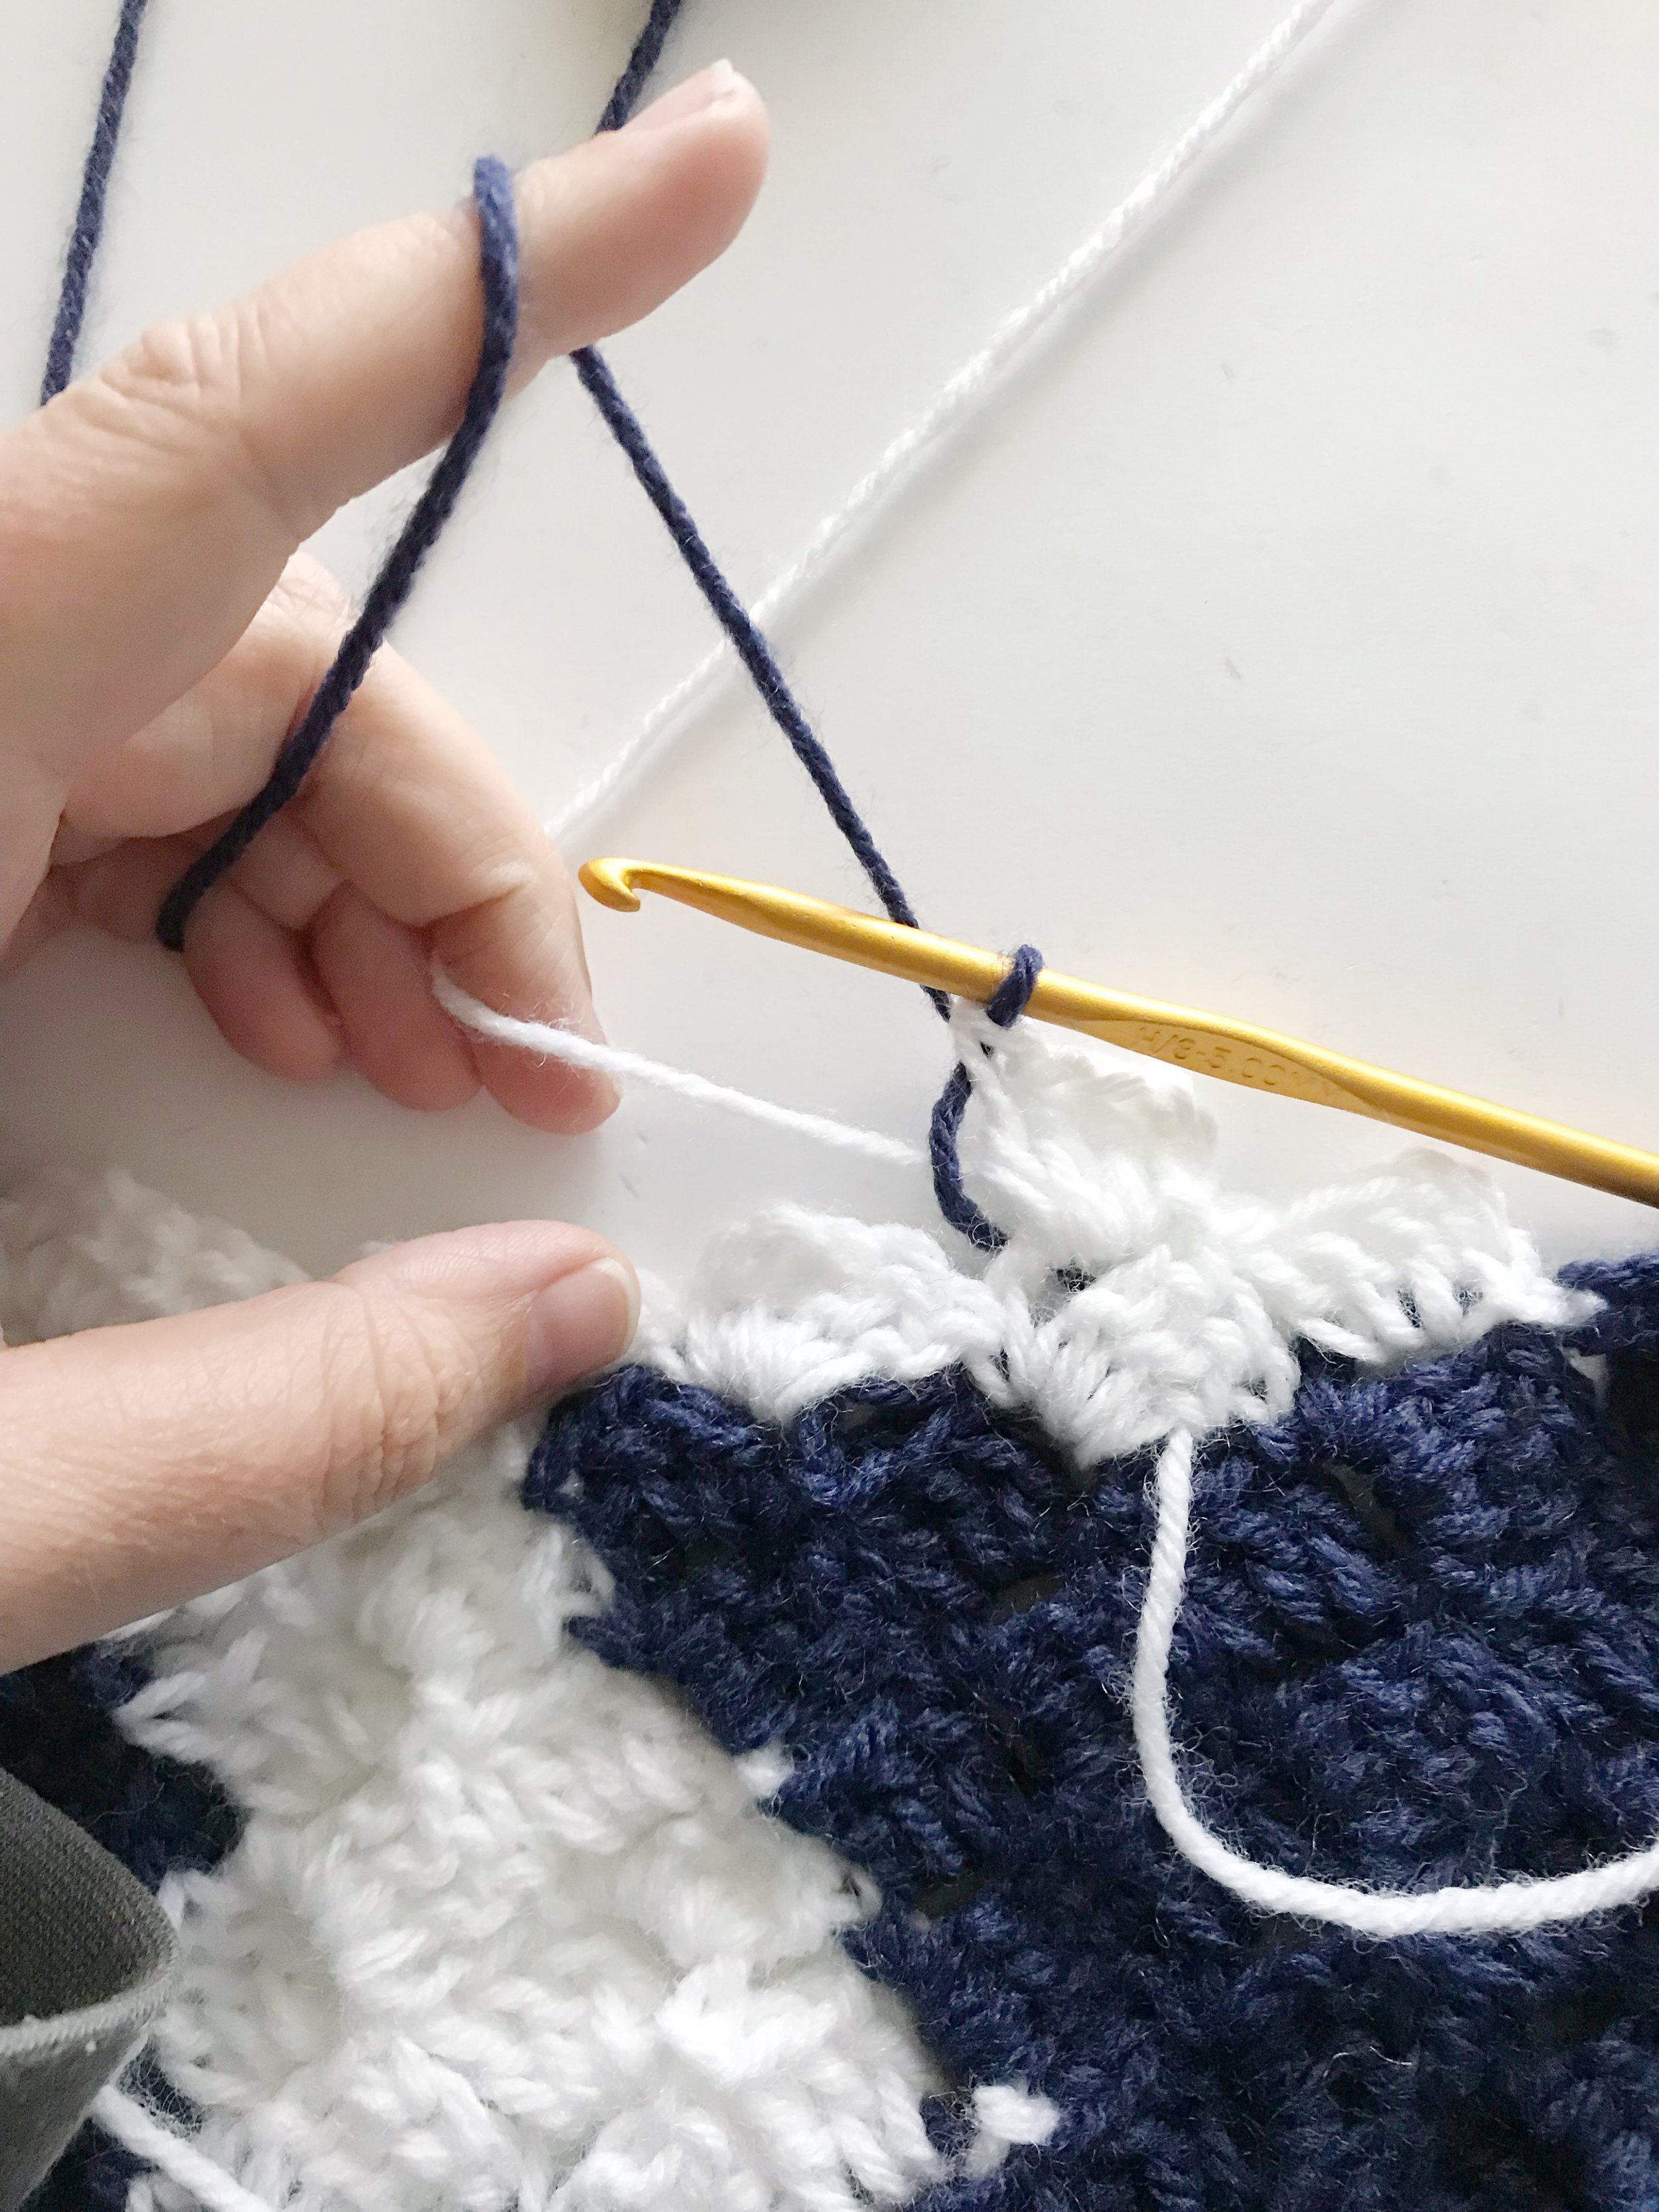 Unique way of doing yarn bobbins for C2C or graphgan crochet projects.